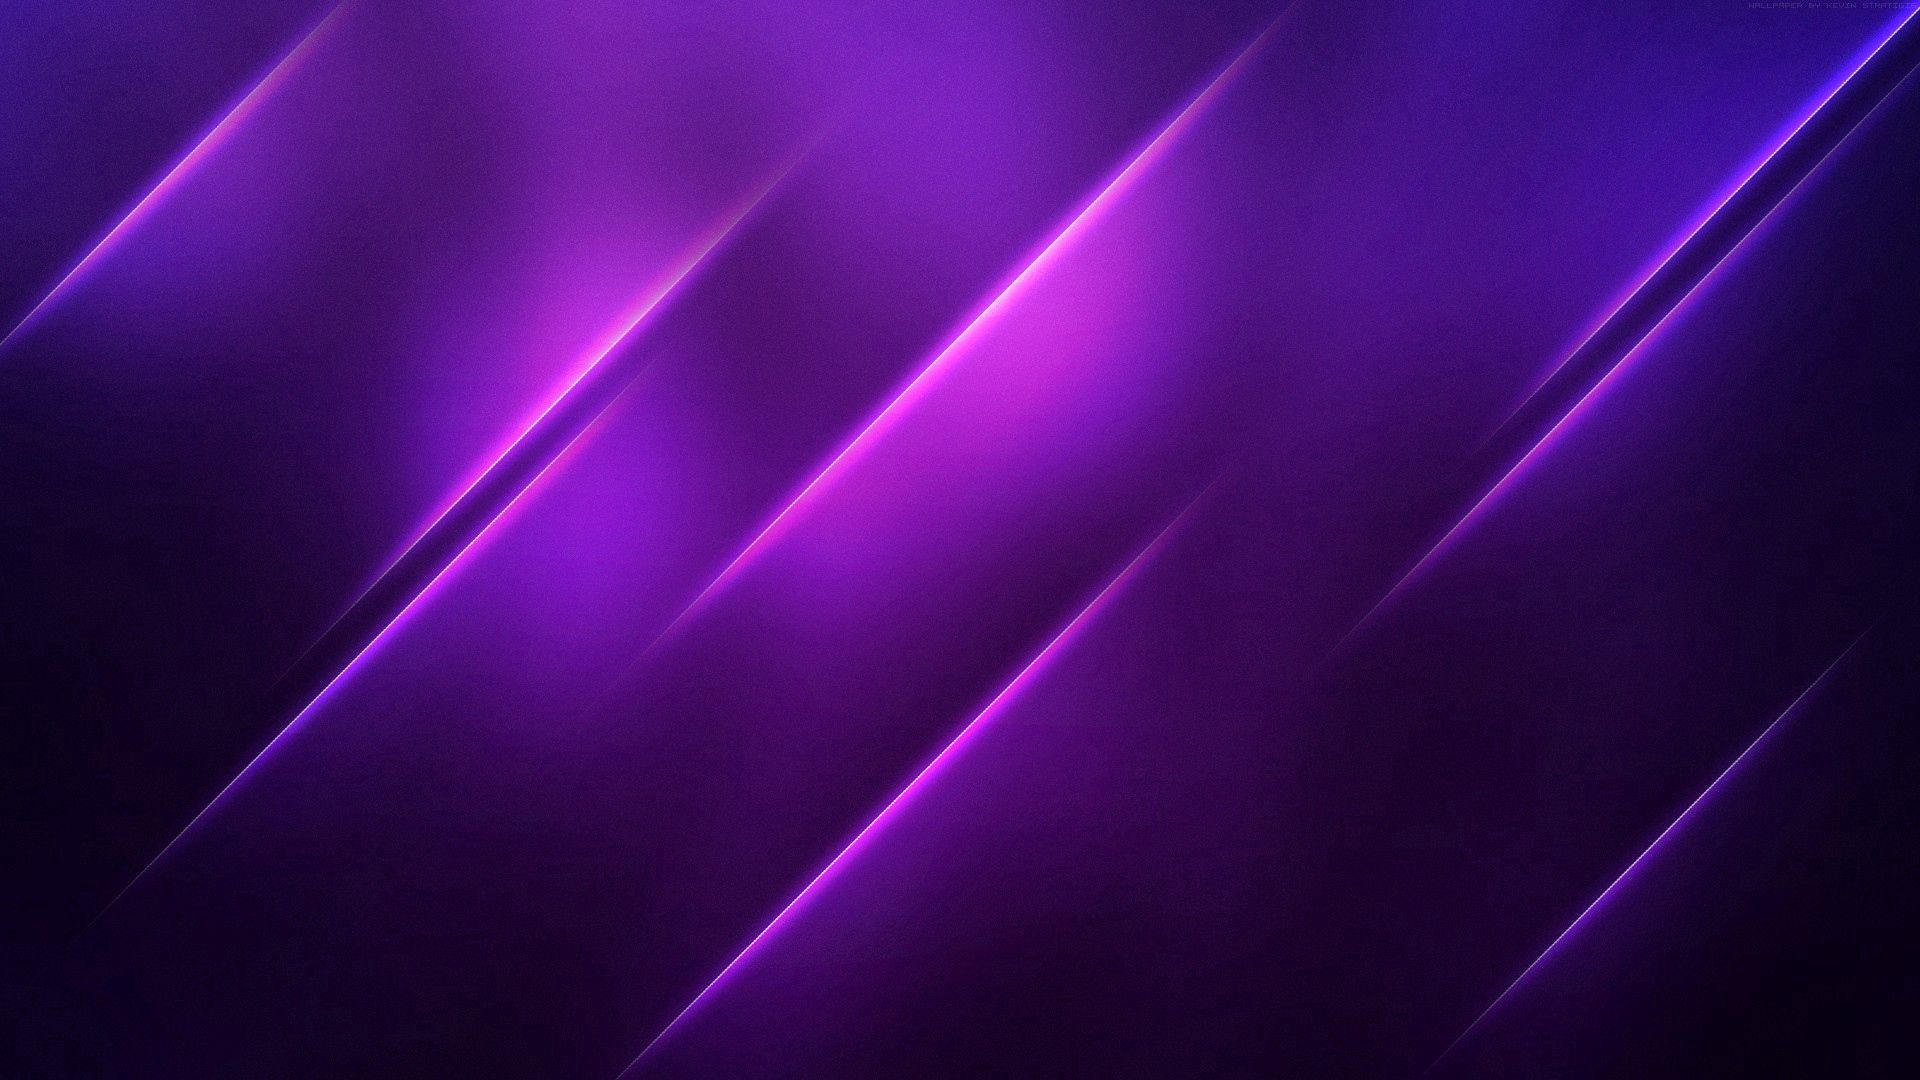 violet, obliquely, abstract, bright, lines, purple 1080p